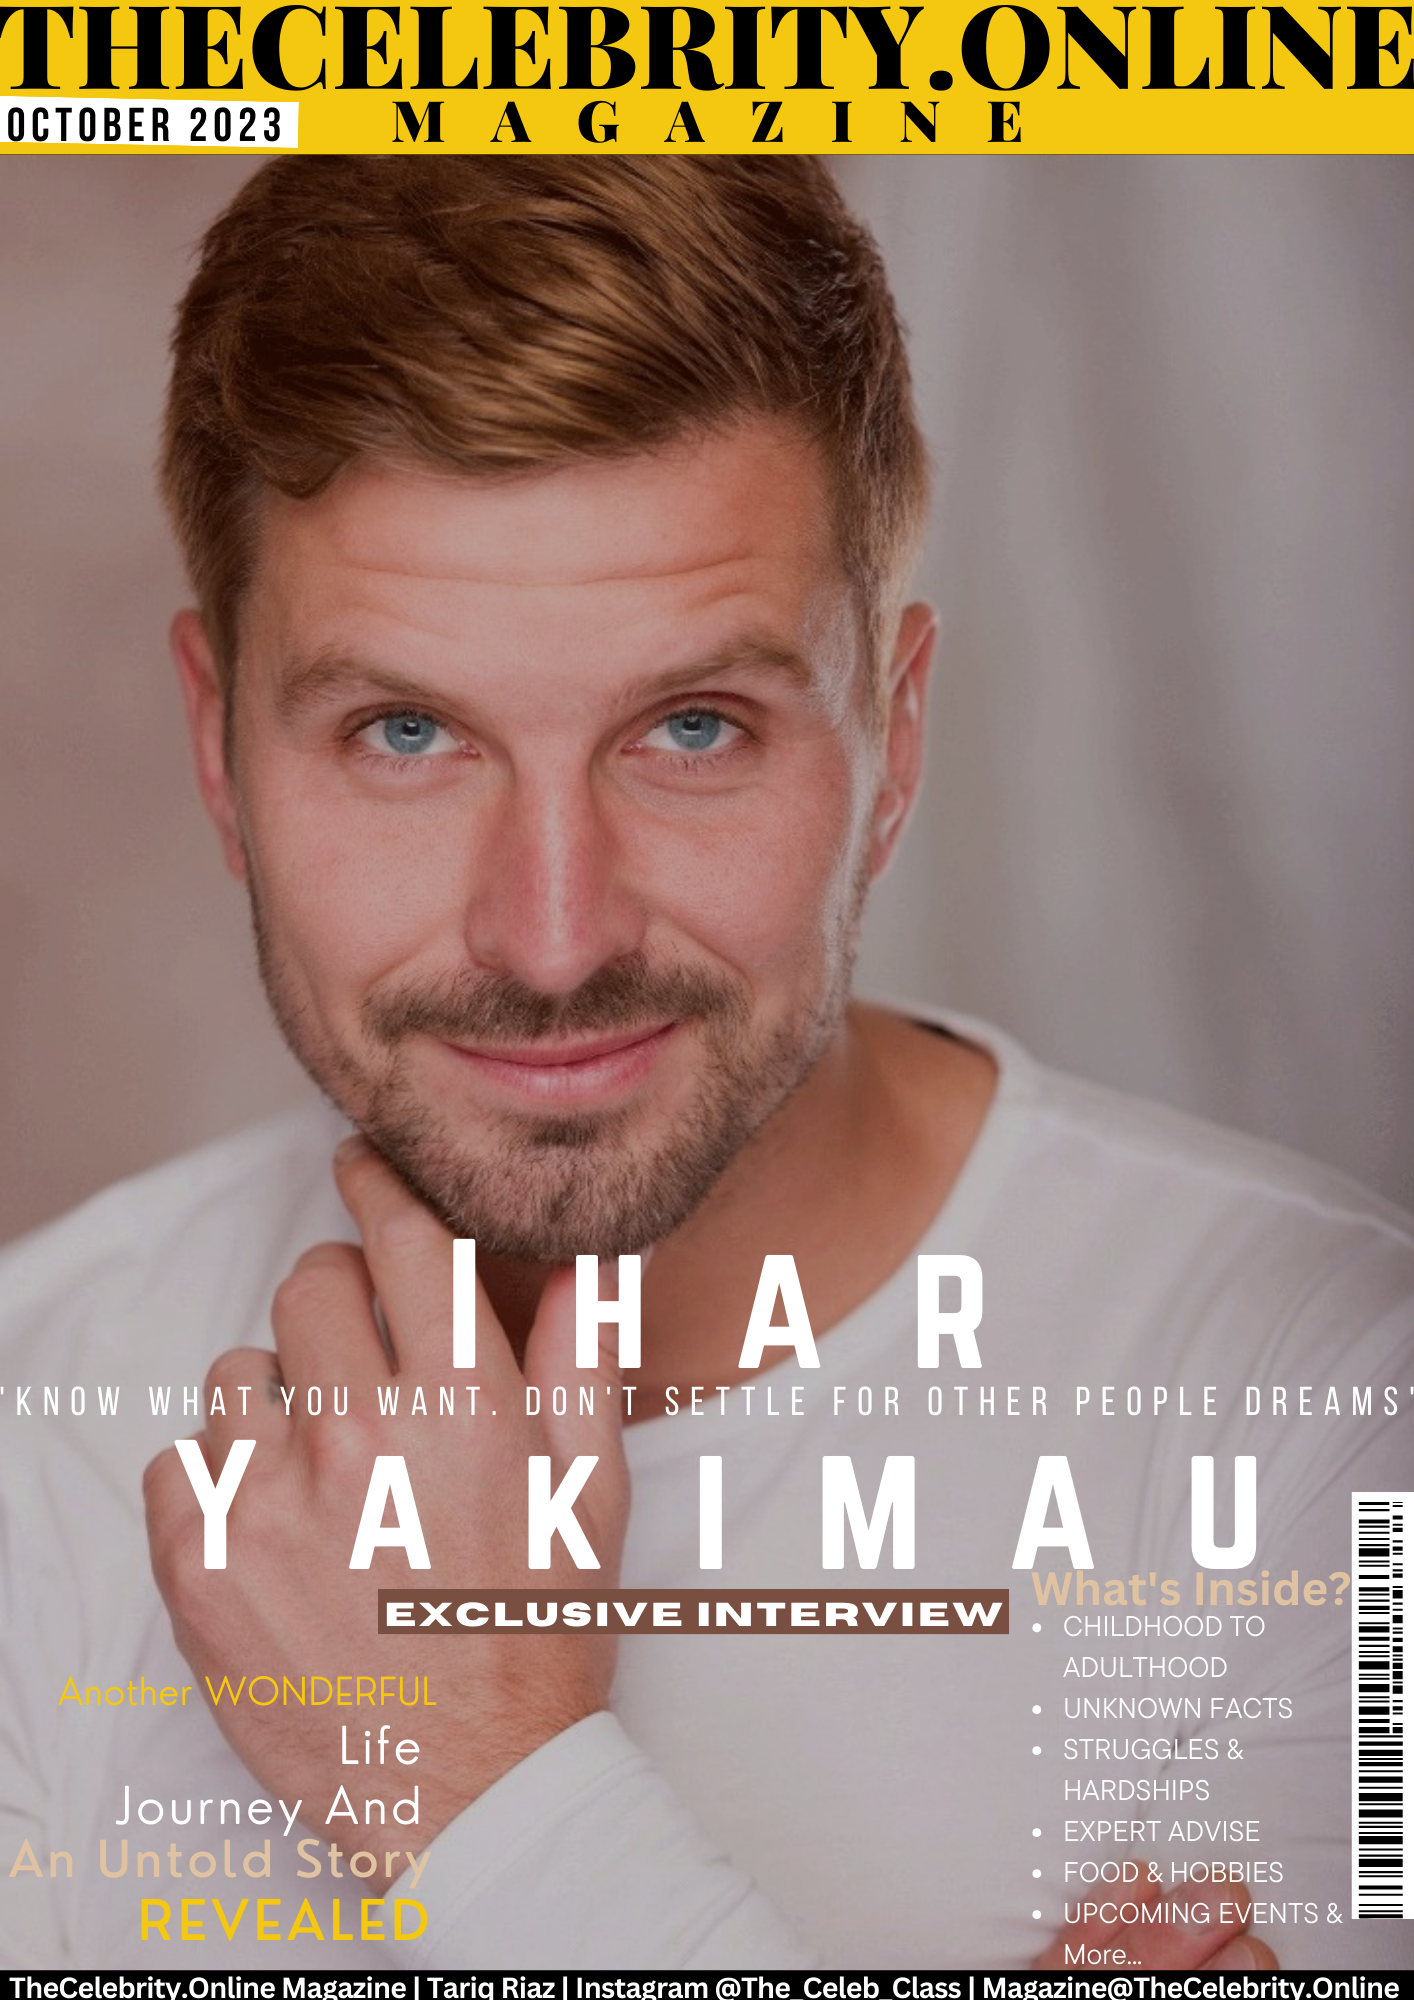 Ihar Yakimau Exclusive Interview – ‘Know What You Want. Don’t Settle For Other People Dreams’